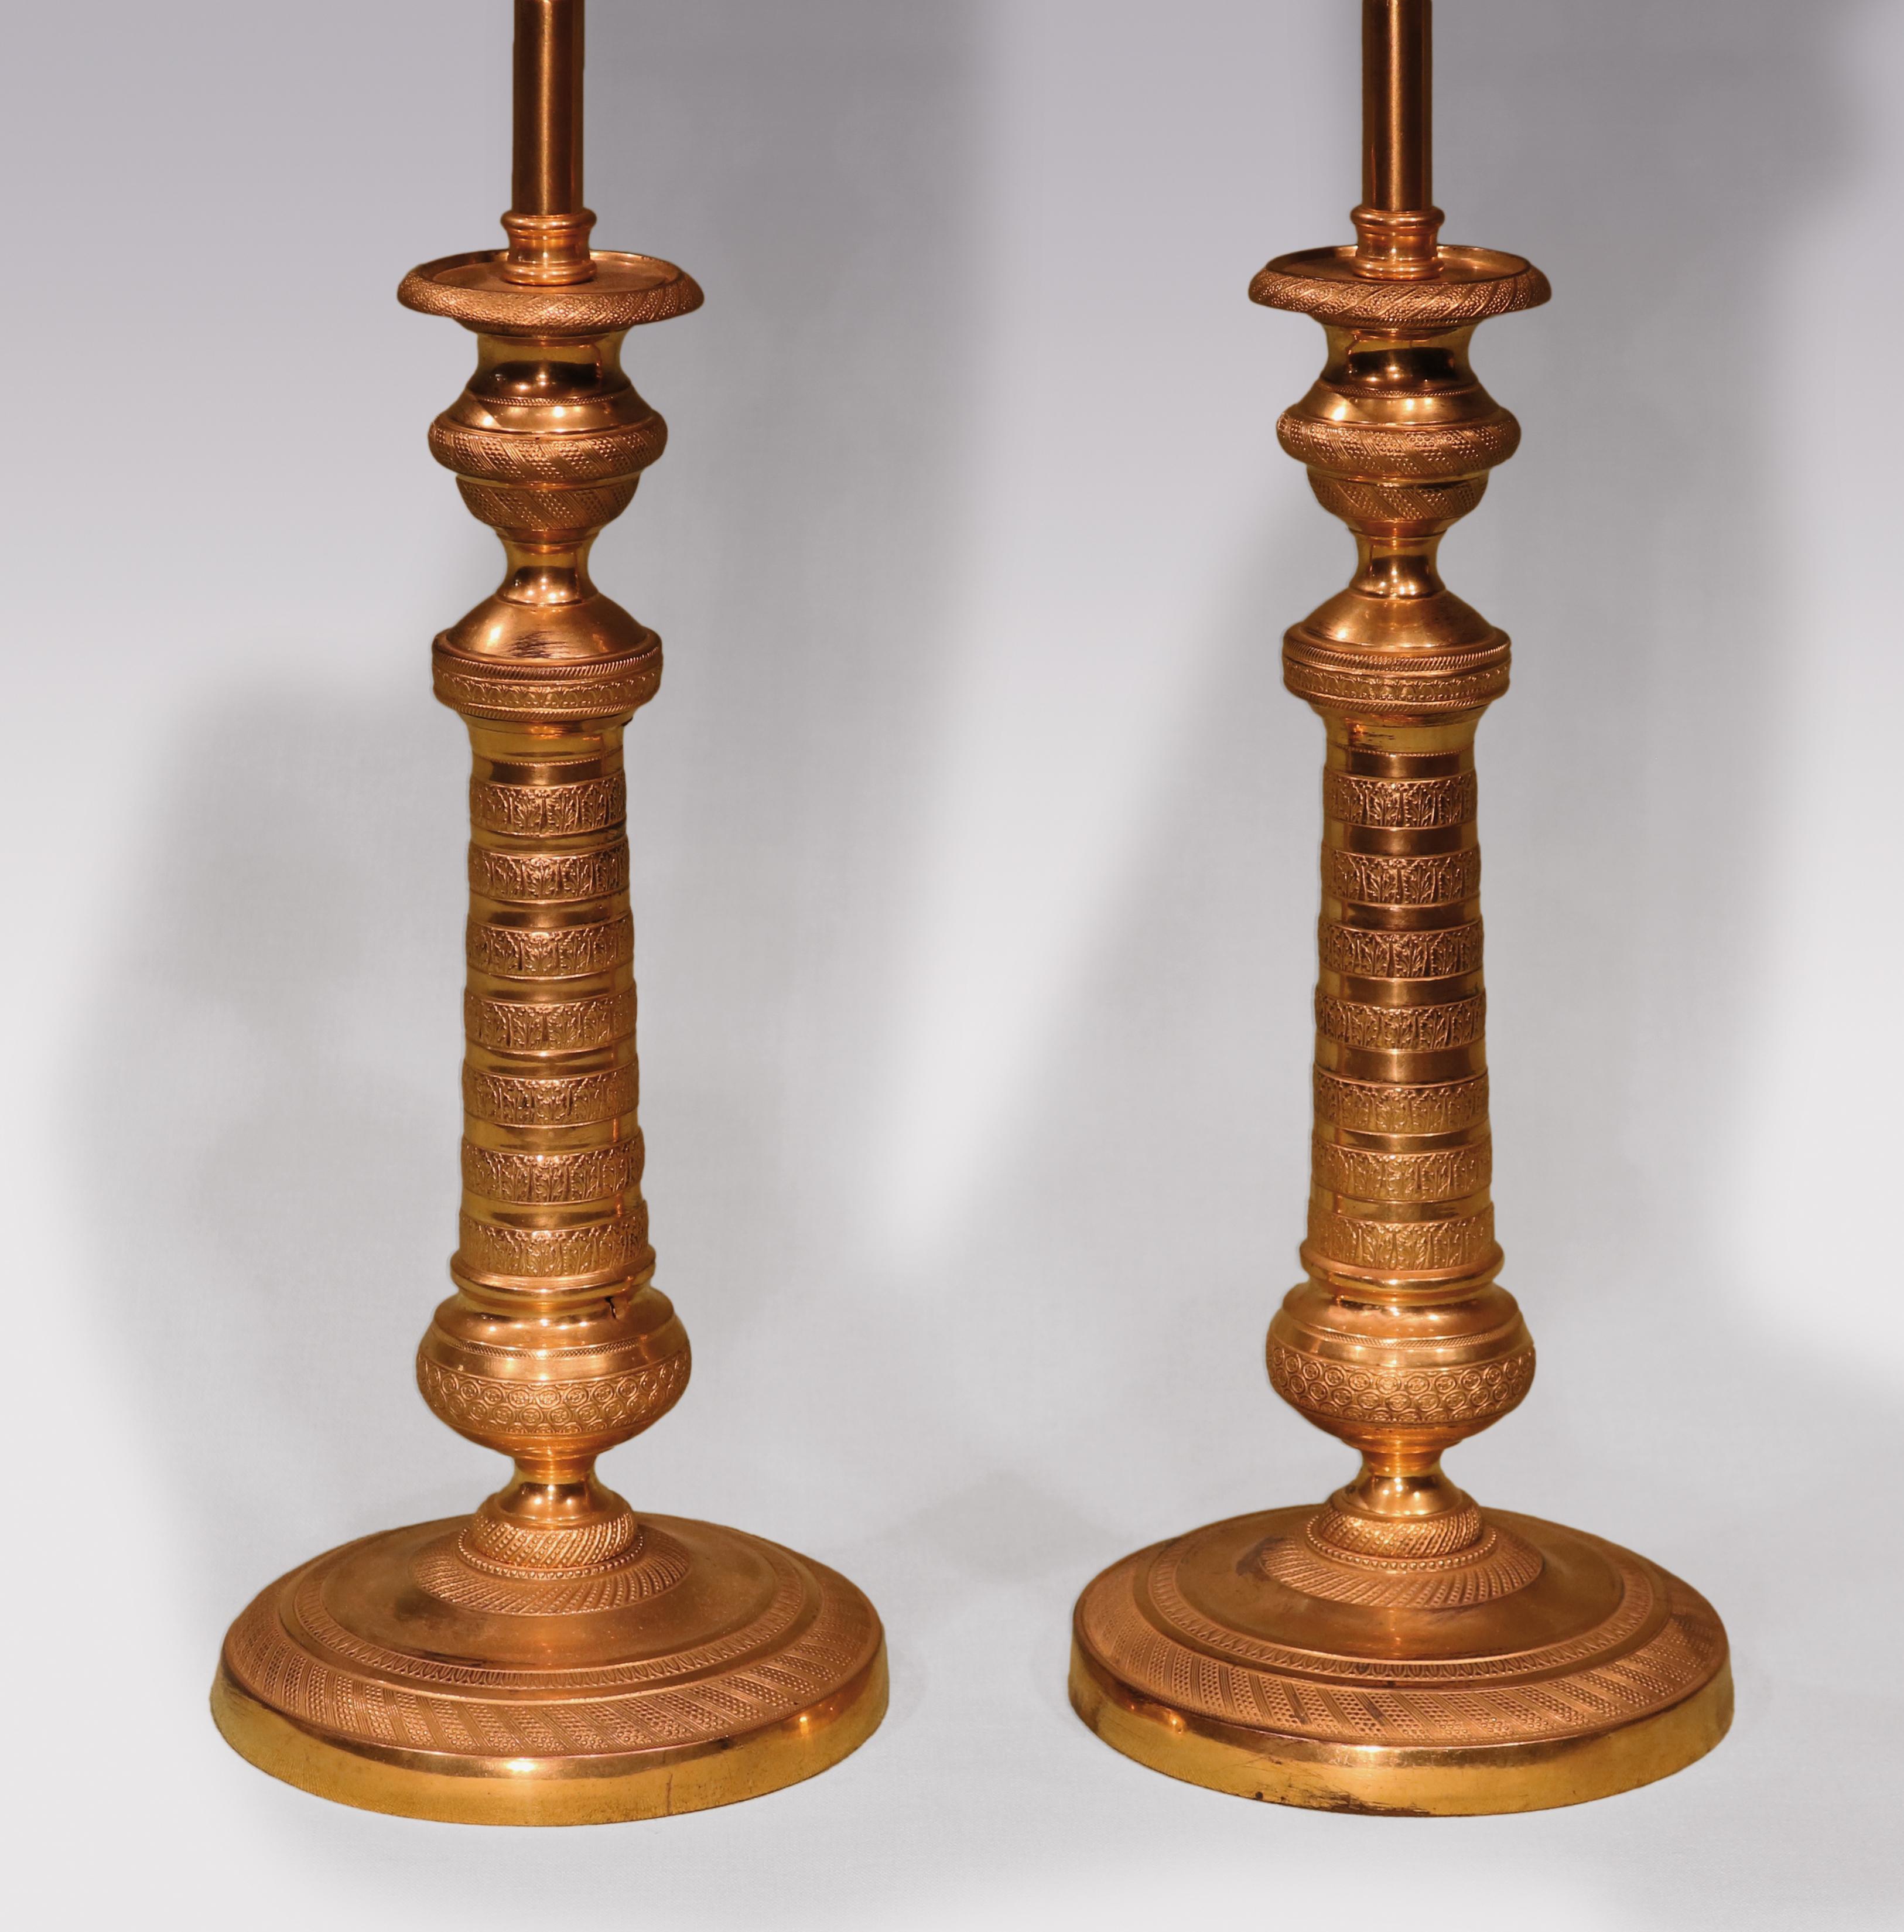 A pair of early 19th century ormolu candlesticks finely engine-turned throughout, having urn shaped nozzles above tapering stems ending on circular bases. (Now converted to lamps)

Measure: Height of candlesticks 27 cm (10.5 ins).